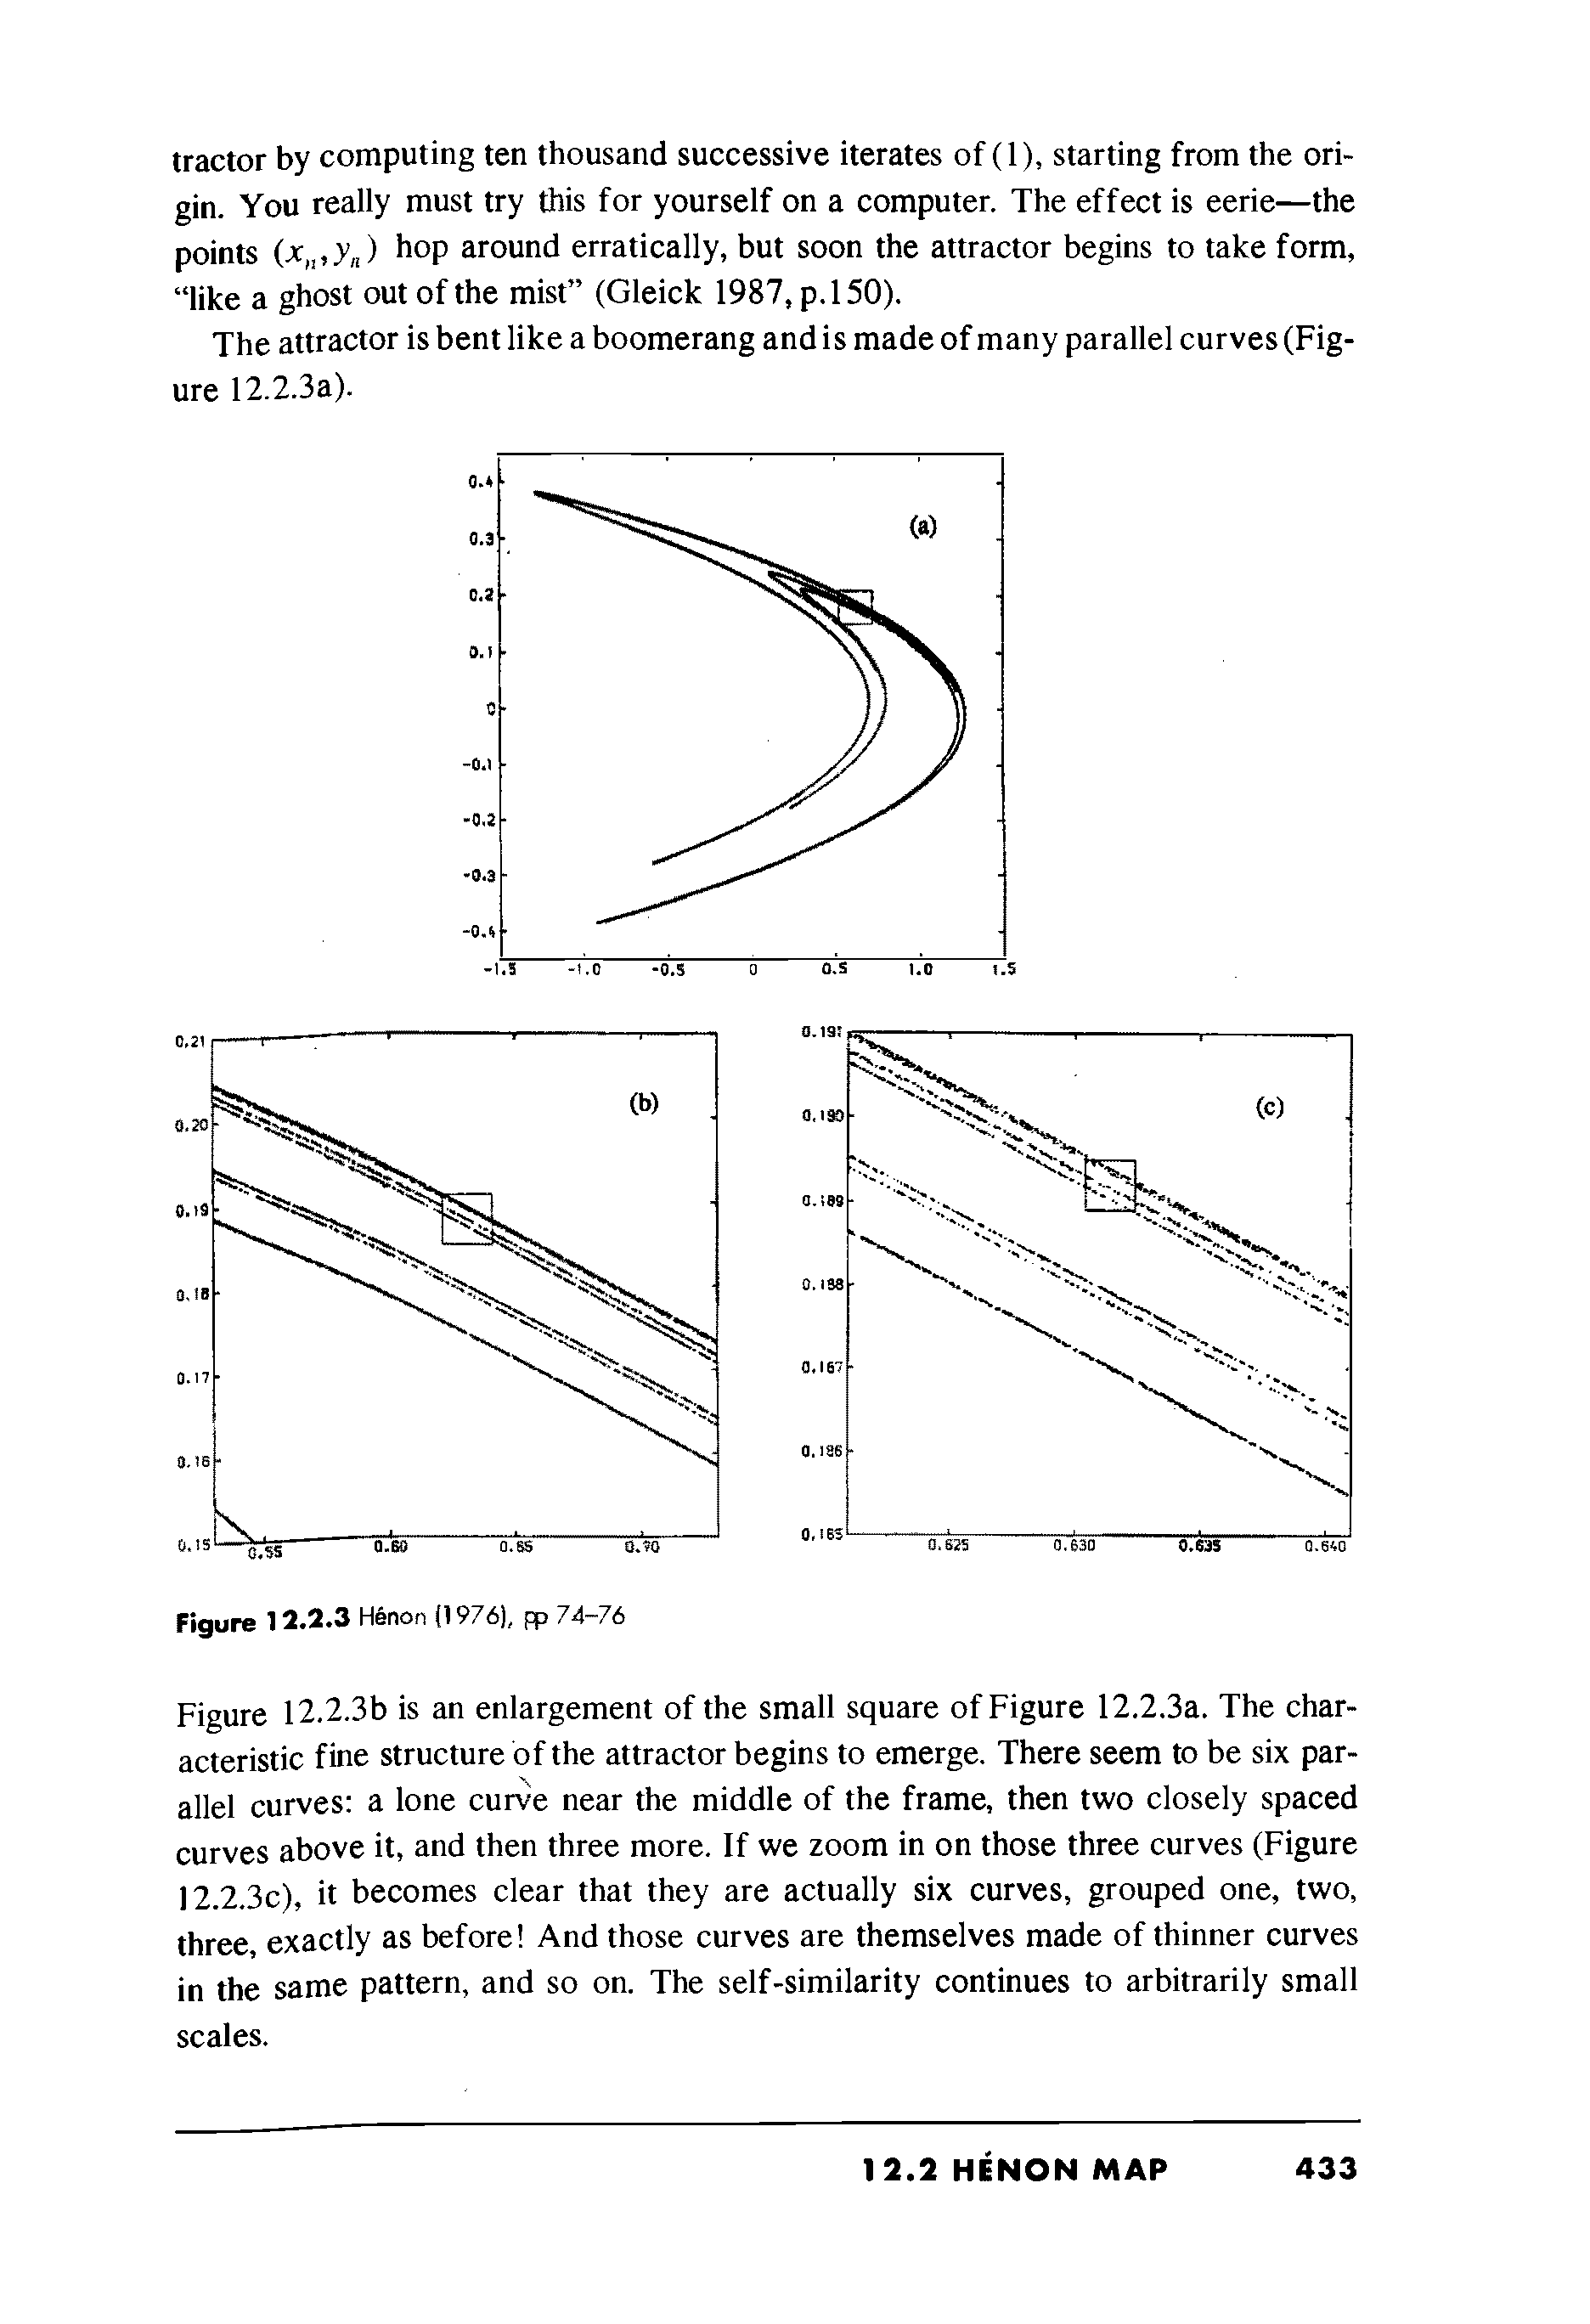 Figure 12.2.3b is an enlargement of the small square of Figure 12.2.3a. The characteristic fine structure of the attractor begins to emerge. There seem to be six parallel curves a lone curve near the middle of the frame, then two closely spaced curves above it, and then three more. If we zoom in on those three curves (Figure 12.2.3c), it becomes clear that they are actually six curves, grouped one, two, three, exactly as before And those curves are themselves made of thinner curves in the same pattern, and so on. The self-similarity continues to arbitrarily small scales.